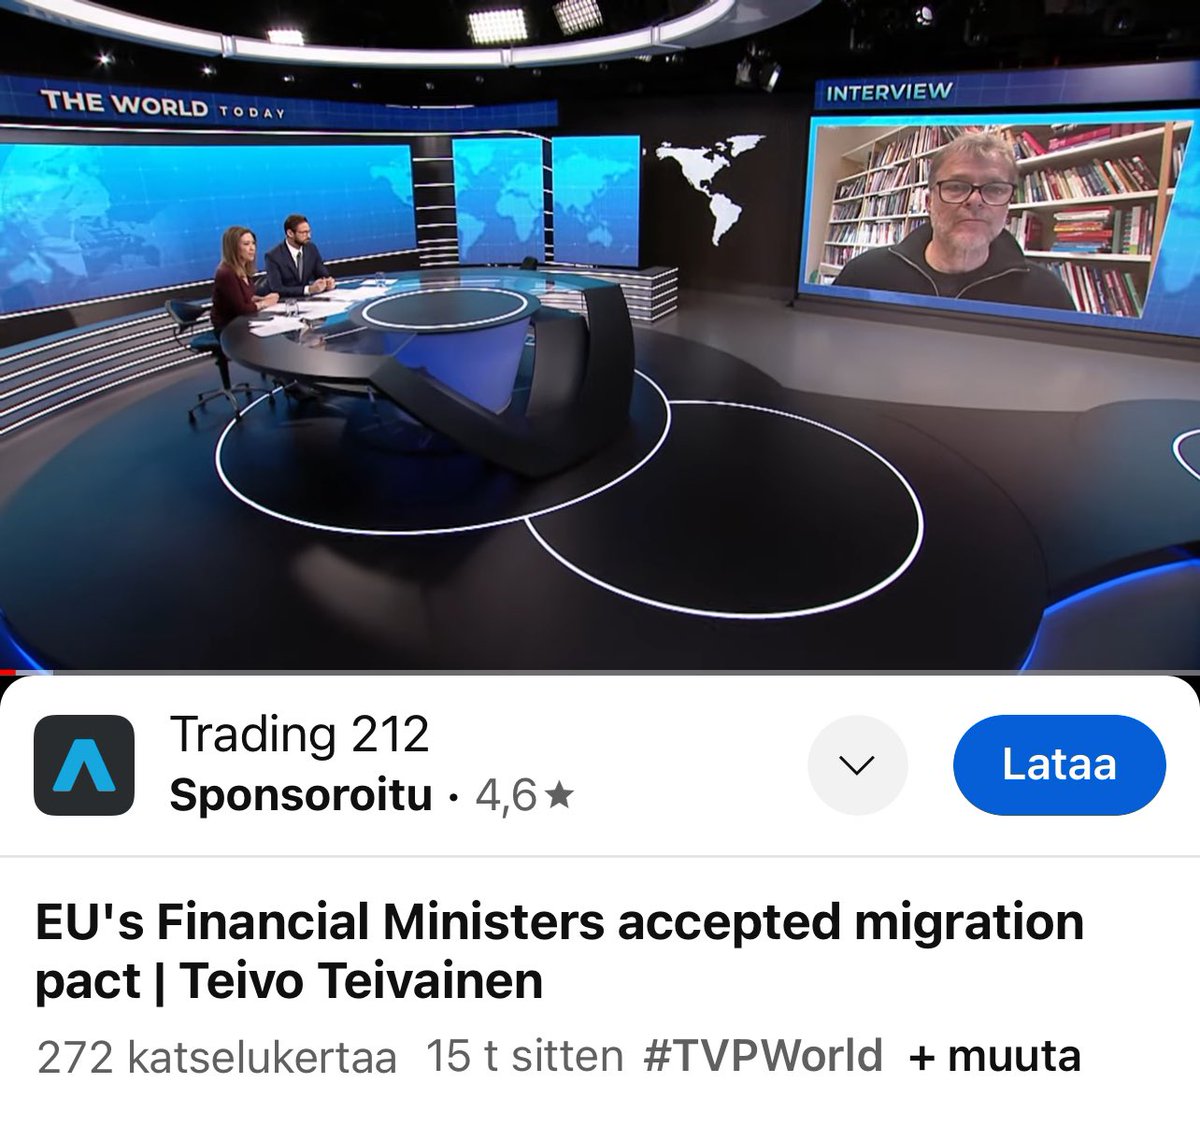 Discussing European Union’s migration dealing and wheeling. For Polish TV channel @TVPWorld_com . Link here: youtu.be/2cSHZuXbl #migration #migrationpact